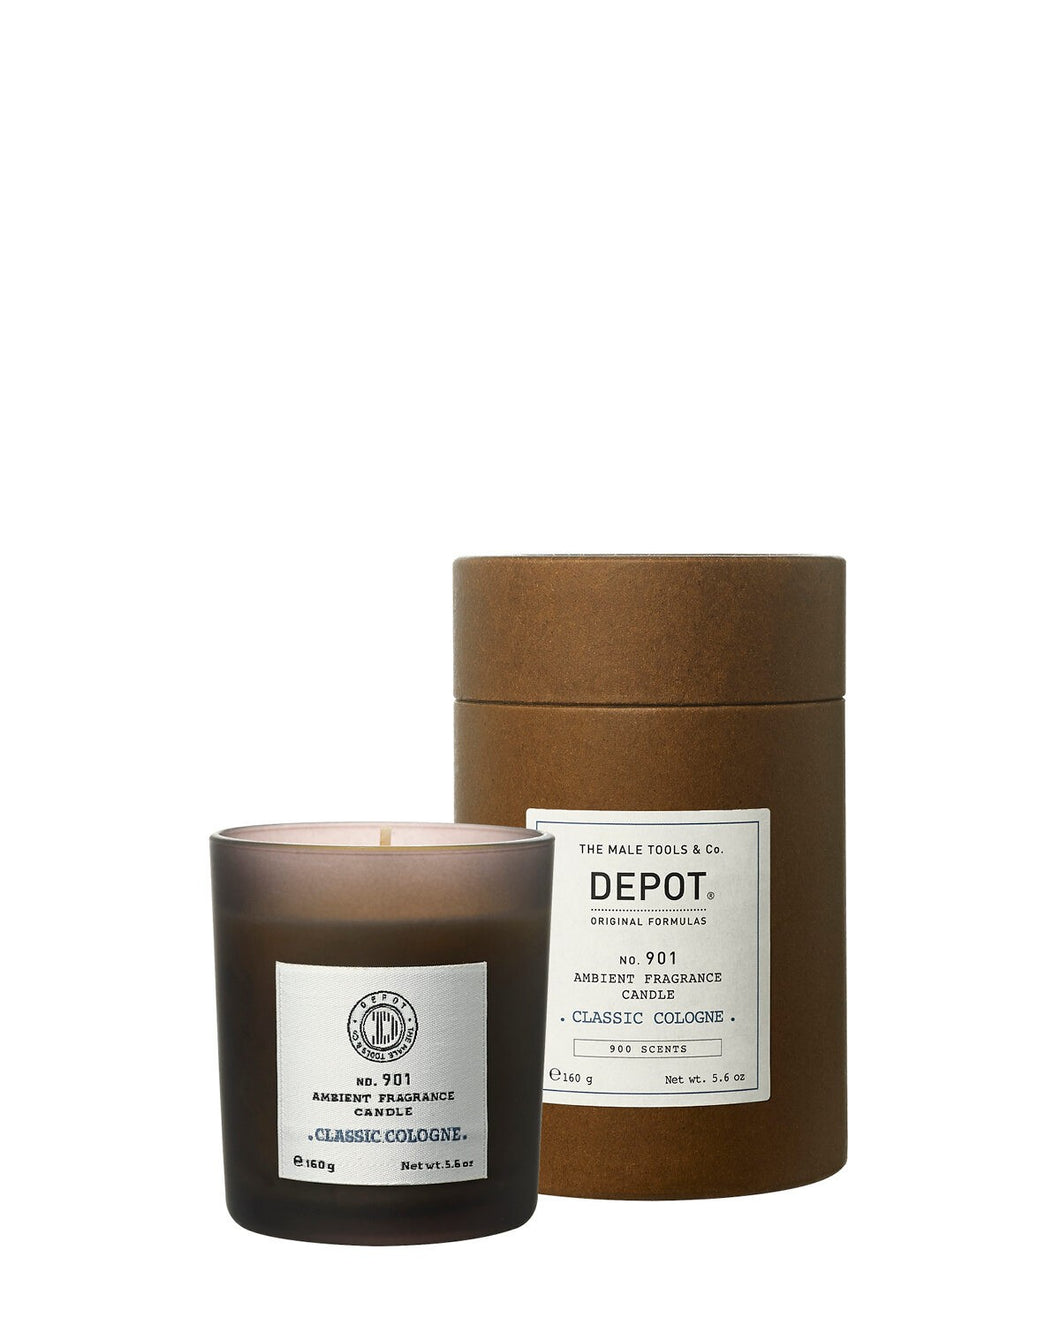 AMBIENT FRAGRANCE CANDLE NO. 901